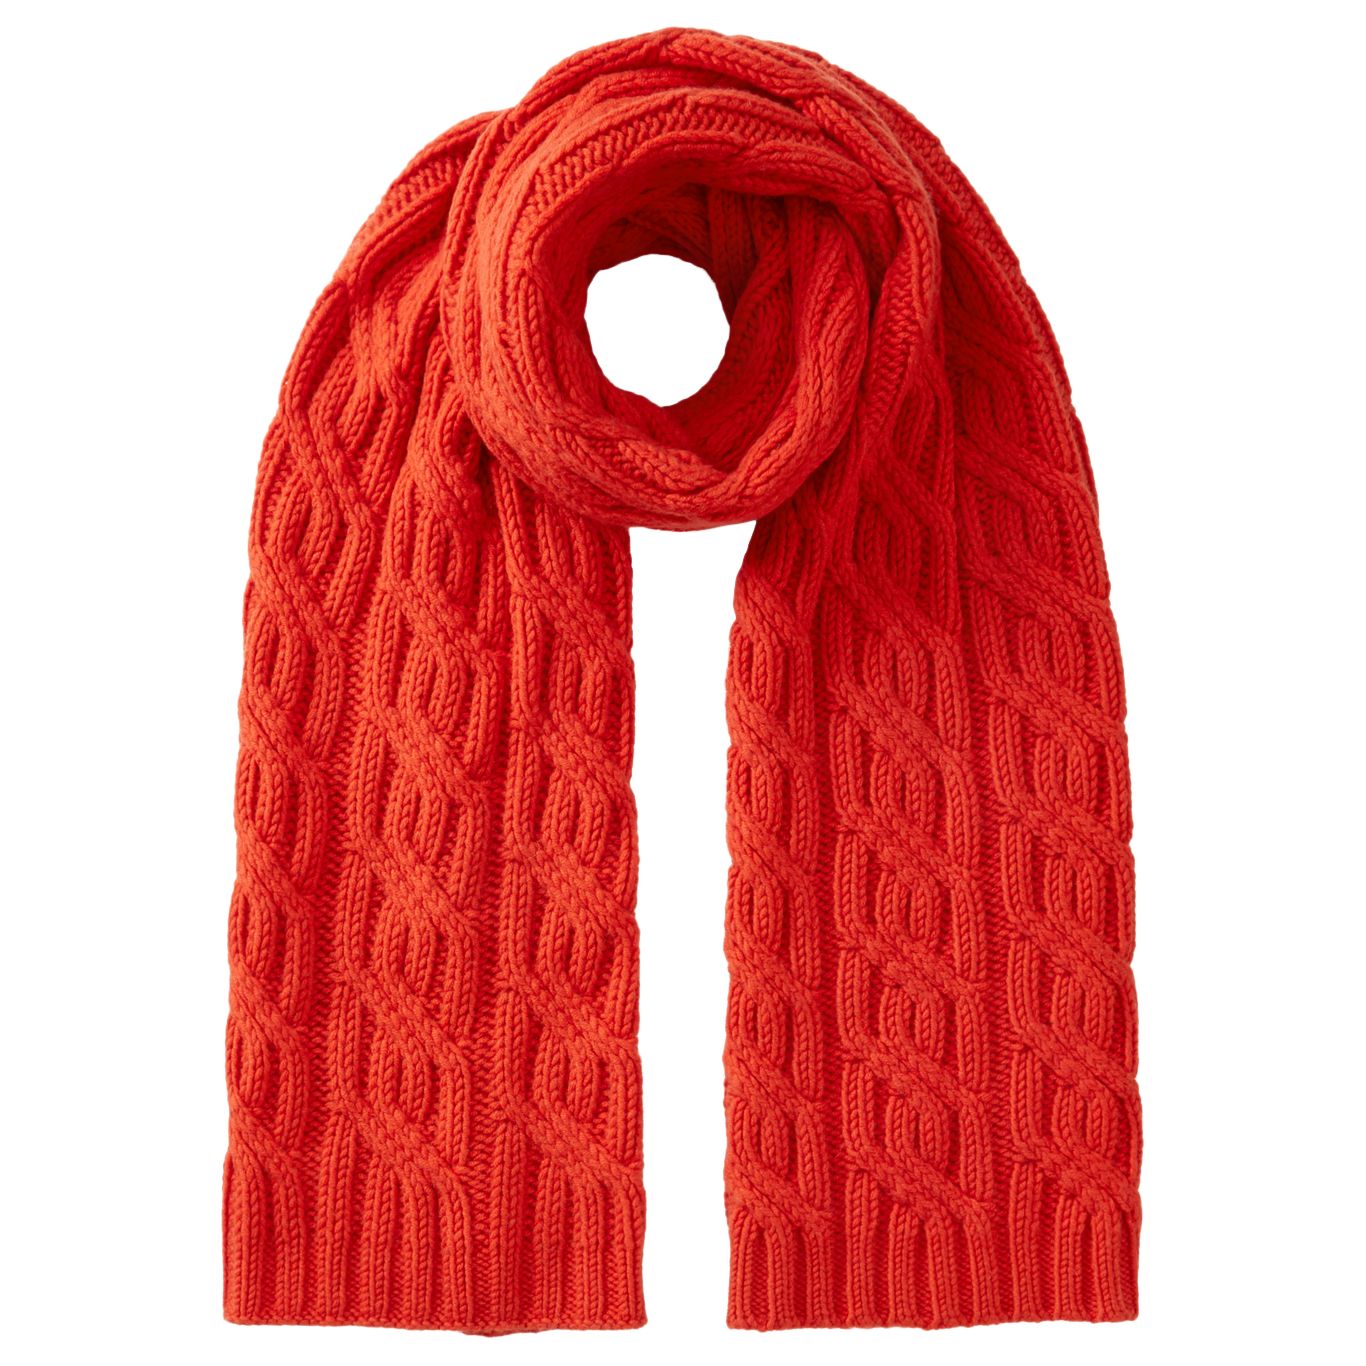 Jigsaw Wool And Cashmere Blend Cable Knit Scarf At John Lewis Partners